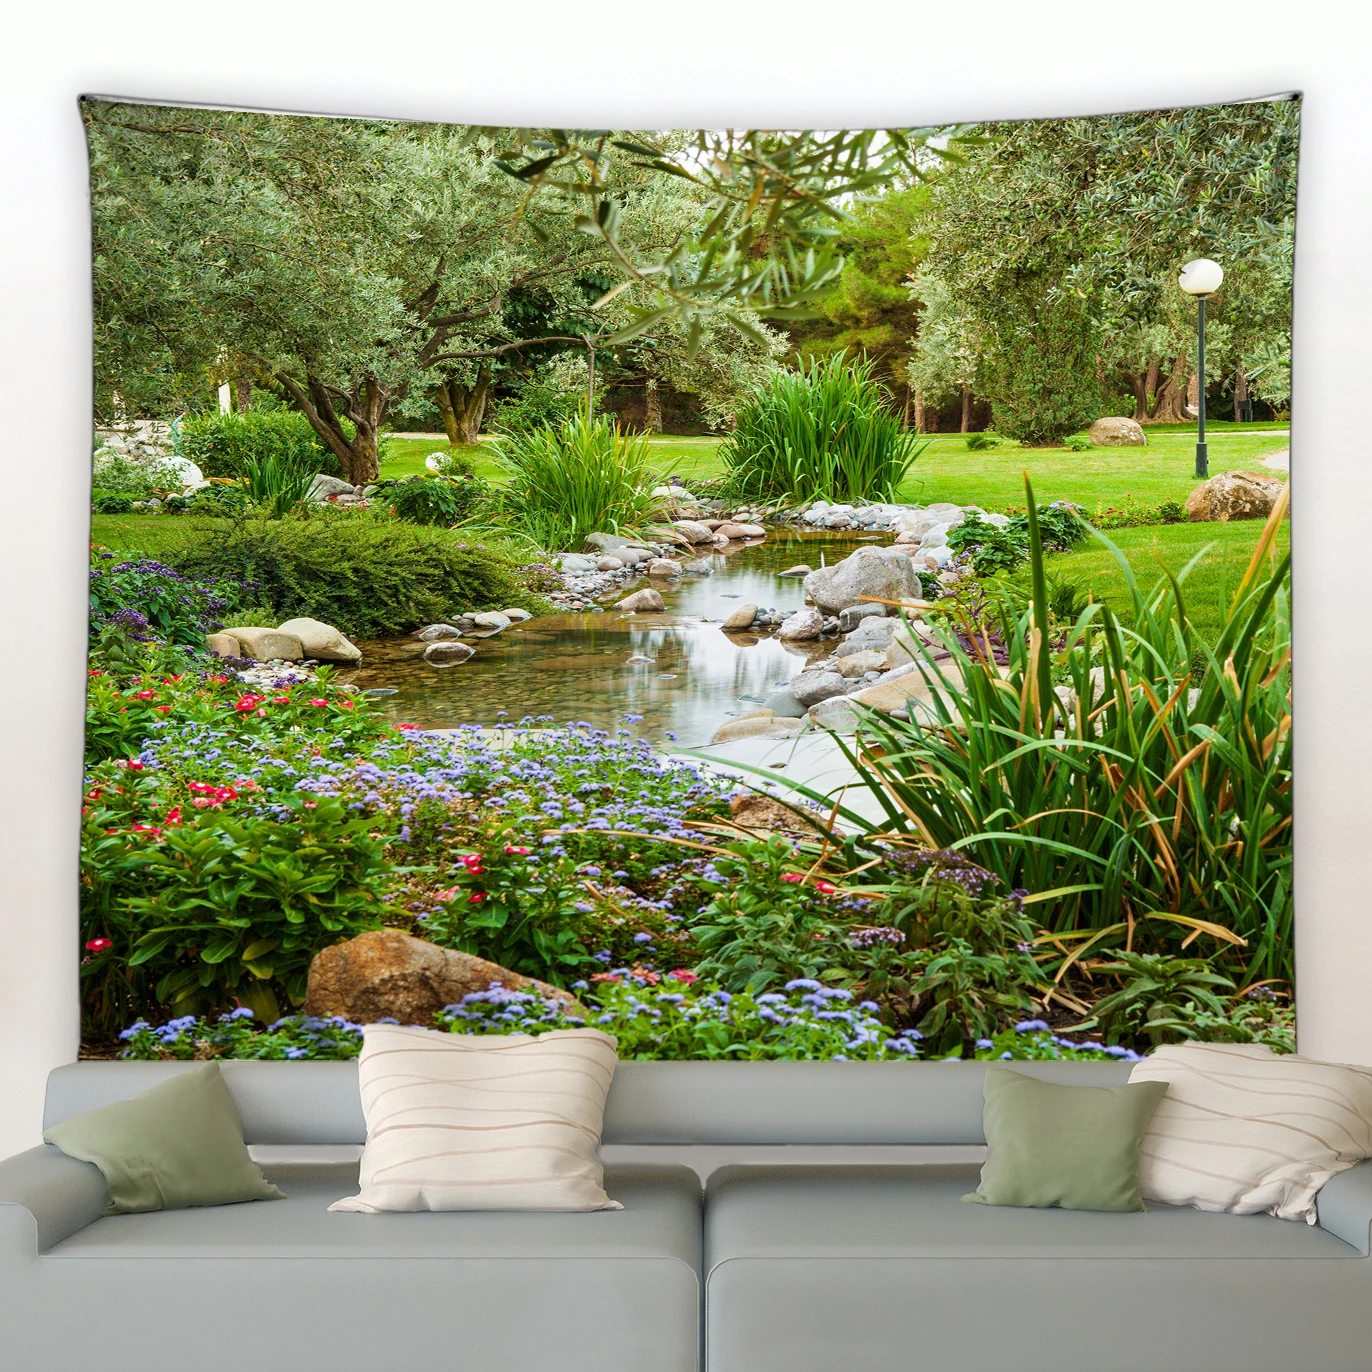 

Spring Park Garden Landscape Tapestry Green Plants Trees Red Purple Flowers Natural Scenery Tapestries Living Room Wall Hanging